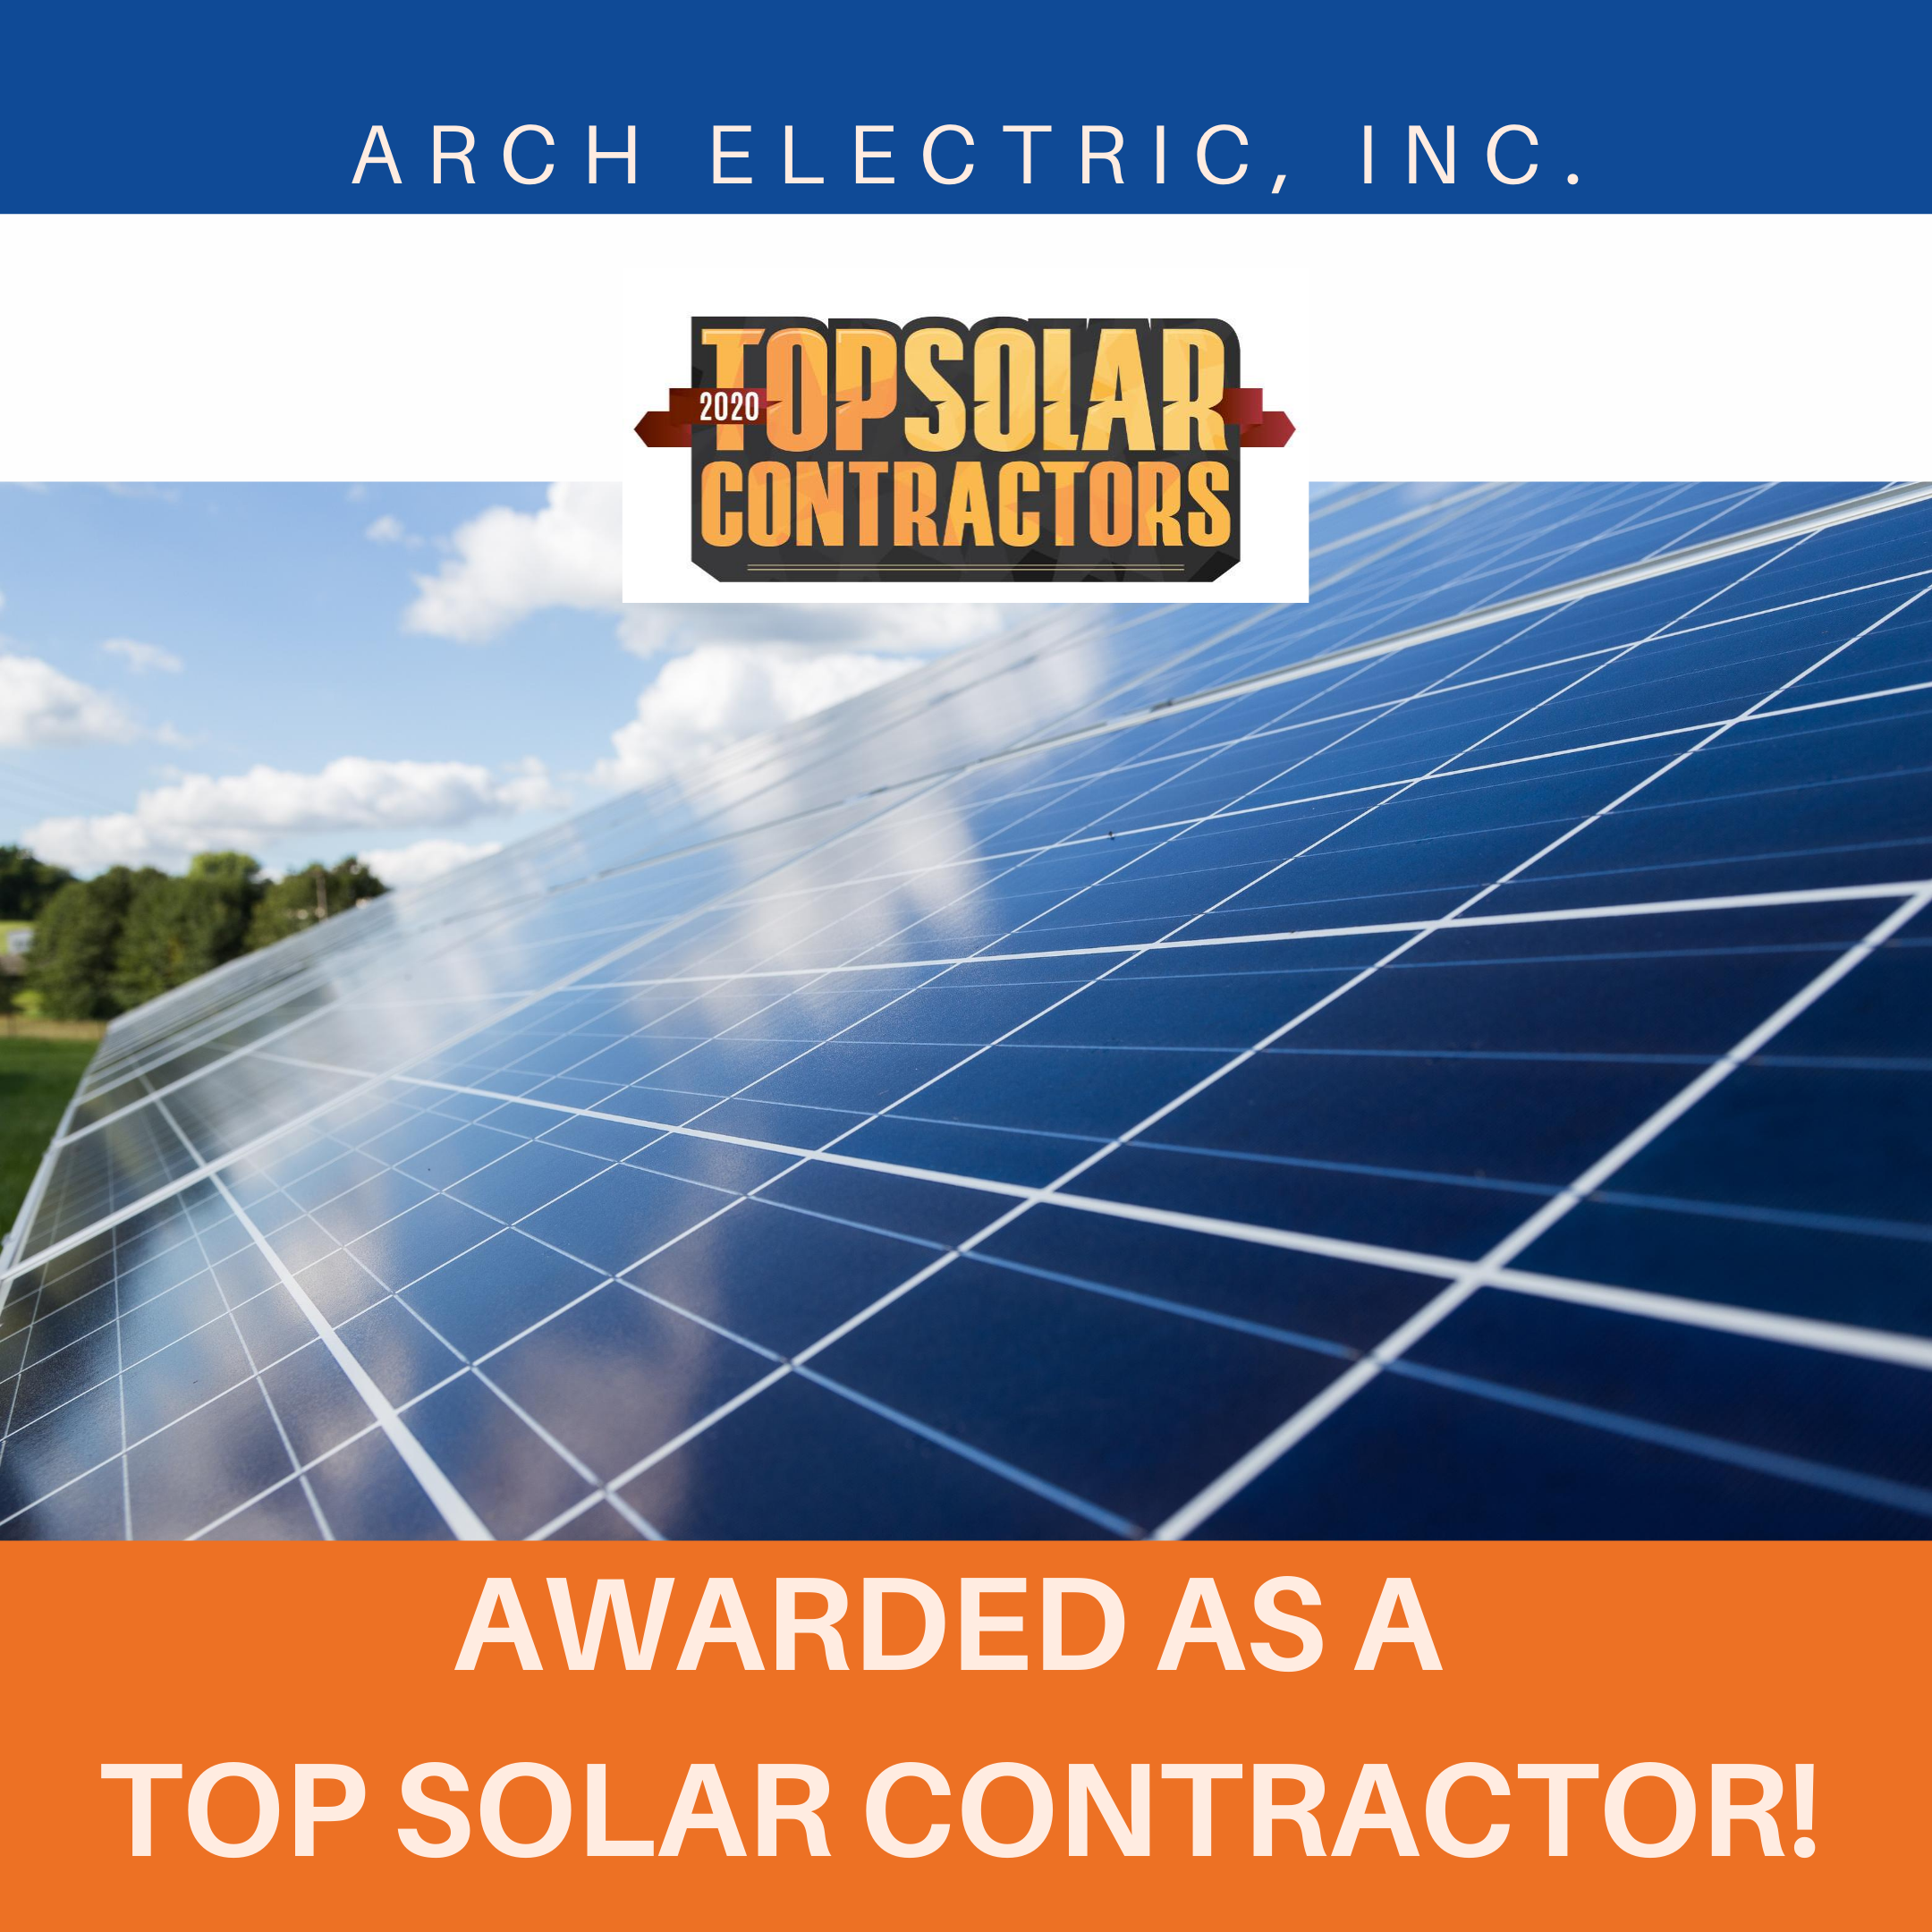 What is a solar contractor?